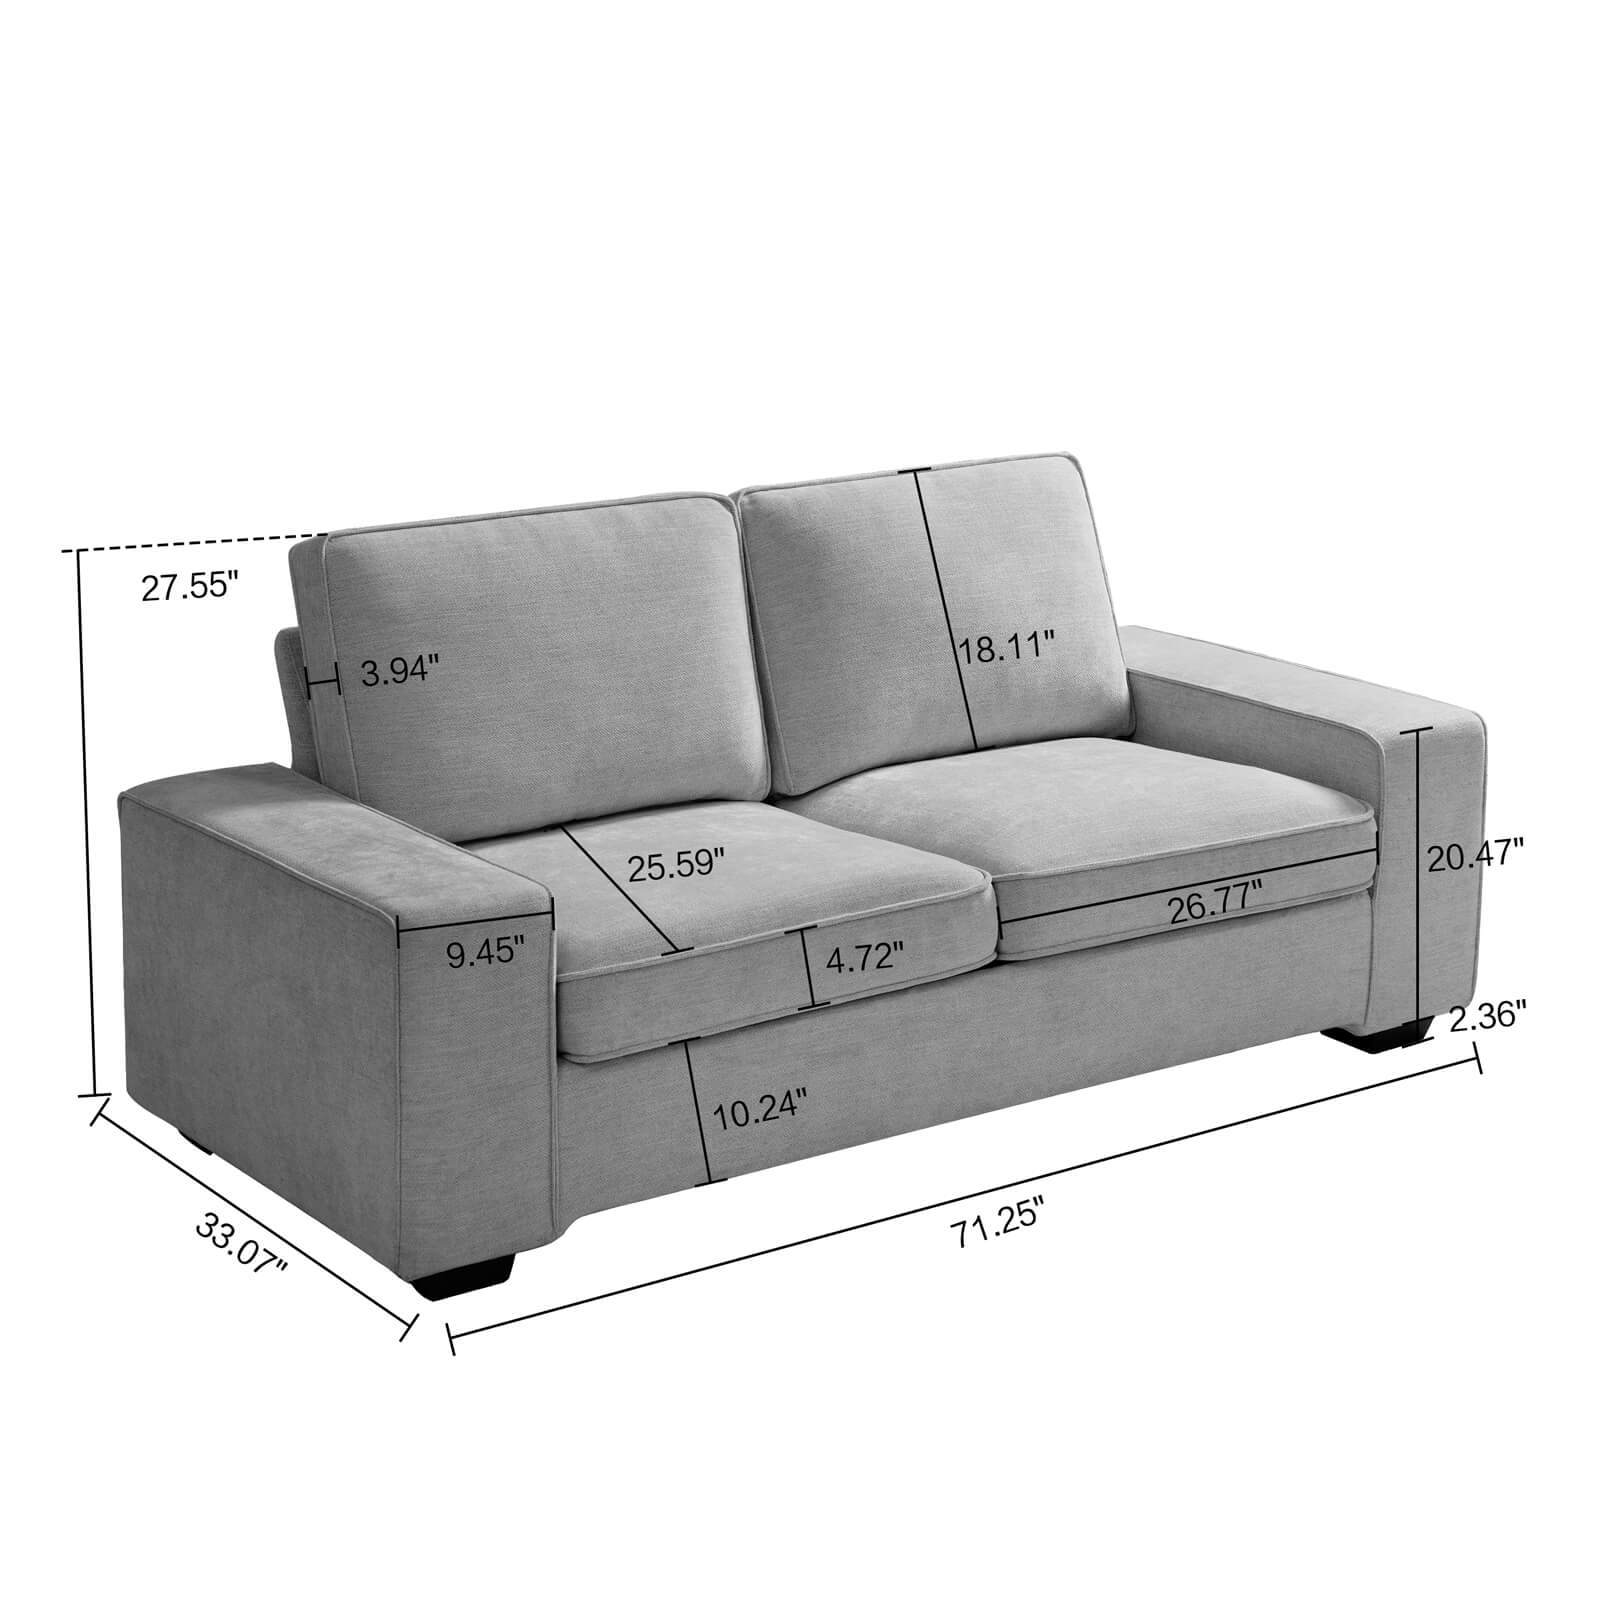 ASJMREYE Fabric Sofa With Solid Wood Frame, Removable Back Cushion And Easy, Tool-Free Assembly